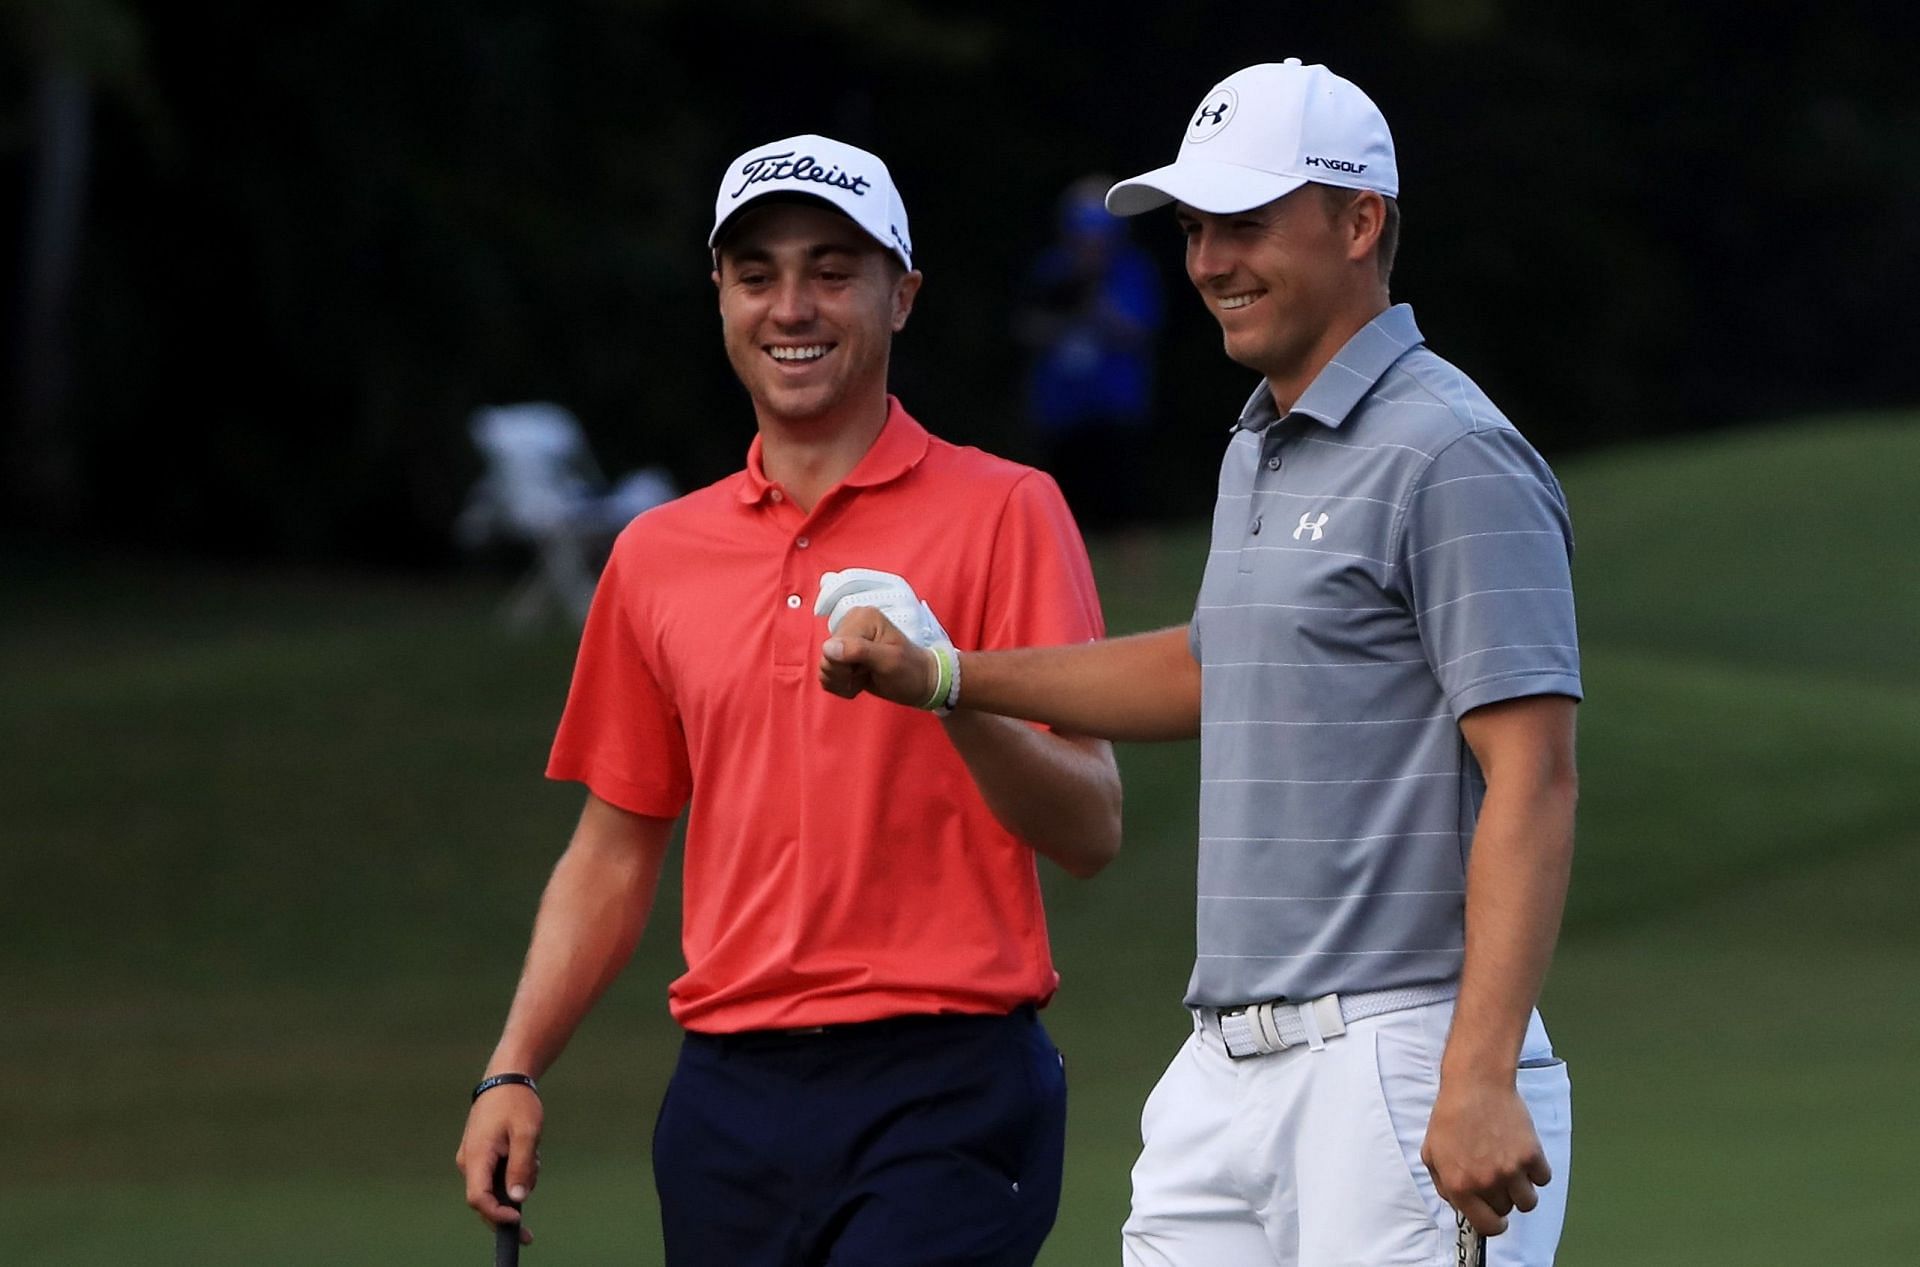 Justin Thomas teams up with Polo Golf on a patriotic collection just in  time for the U.S. Open, Golf Equipment: Clubs, Balls, Bags